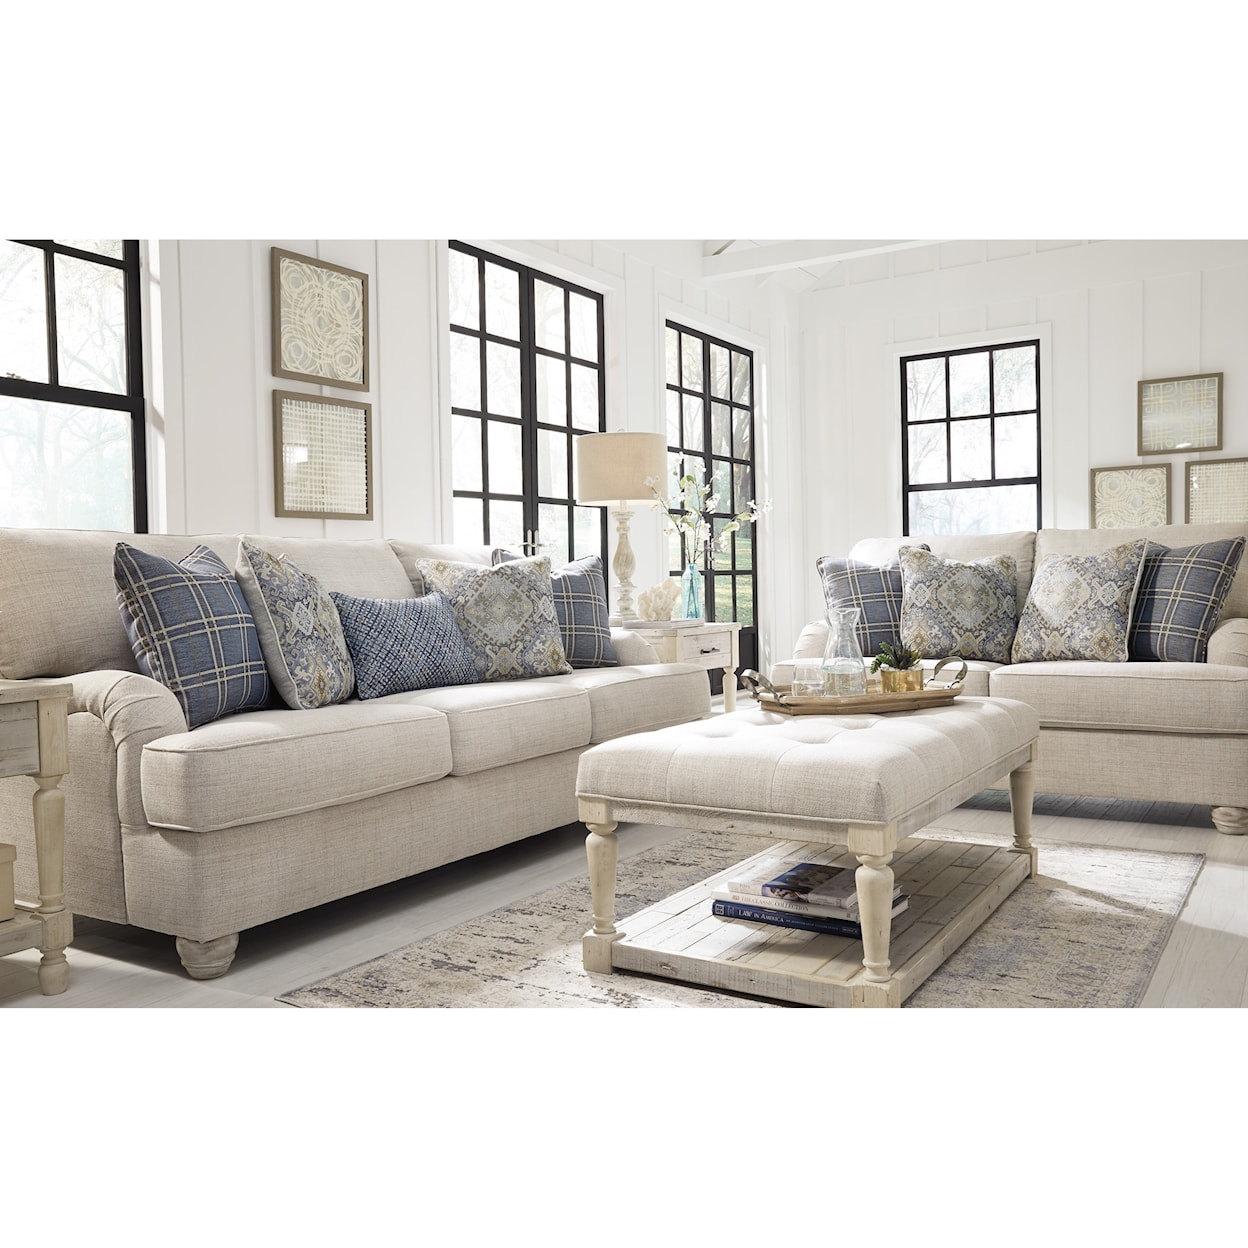 Benchcraft Traemore 2-Piece Living Room Group